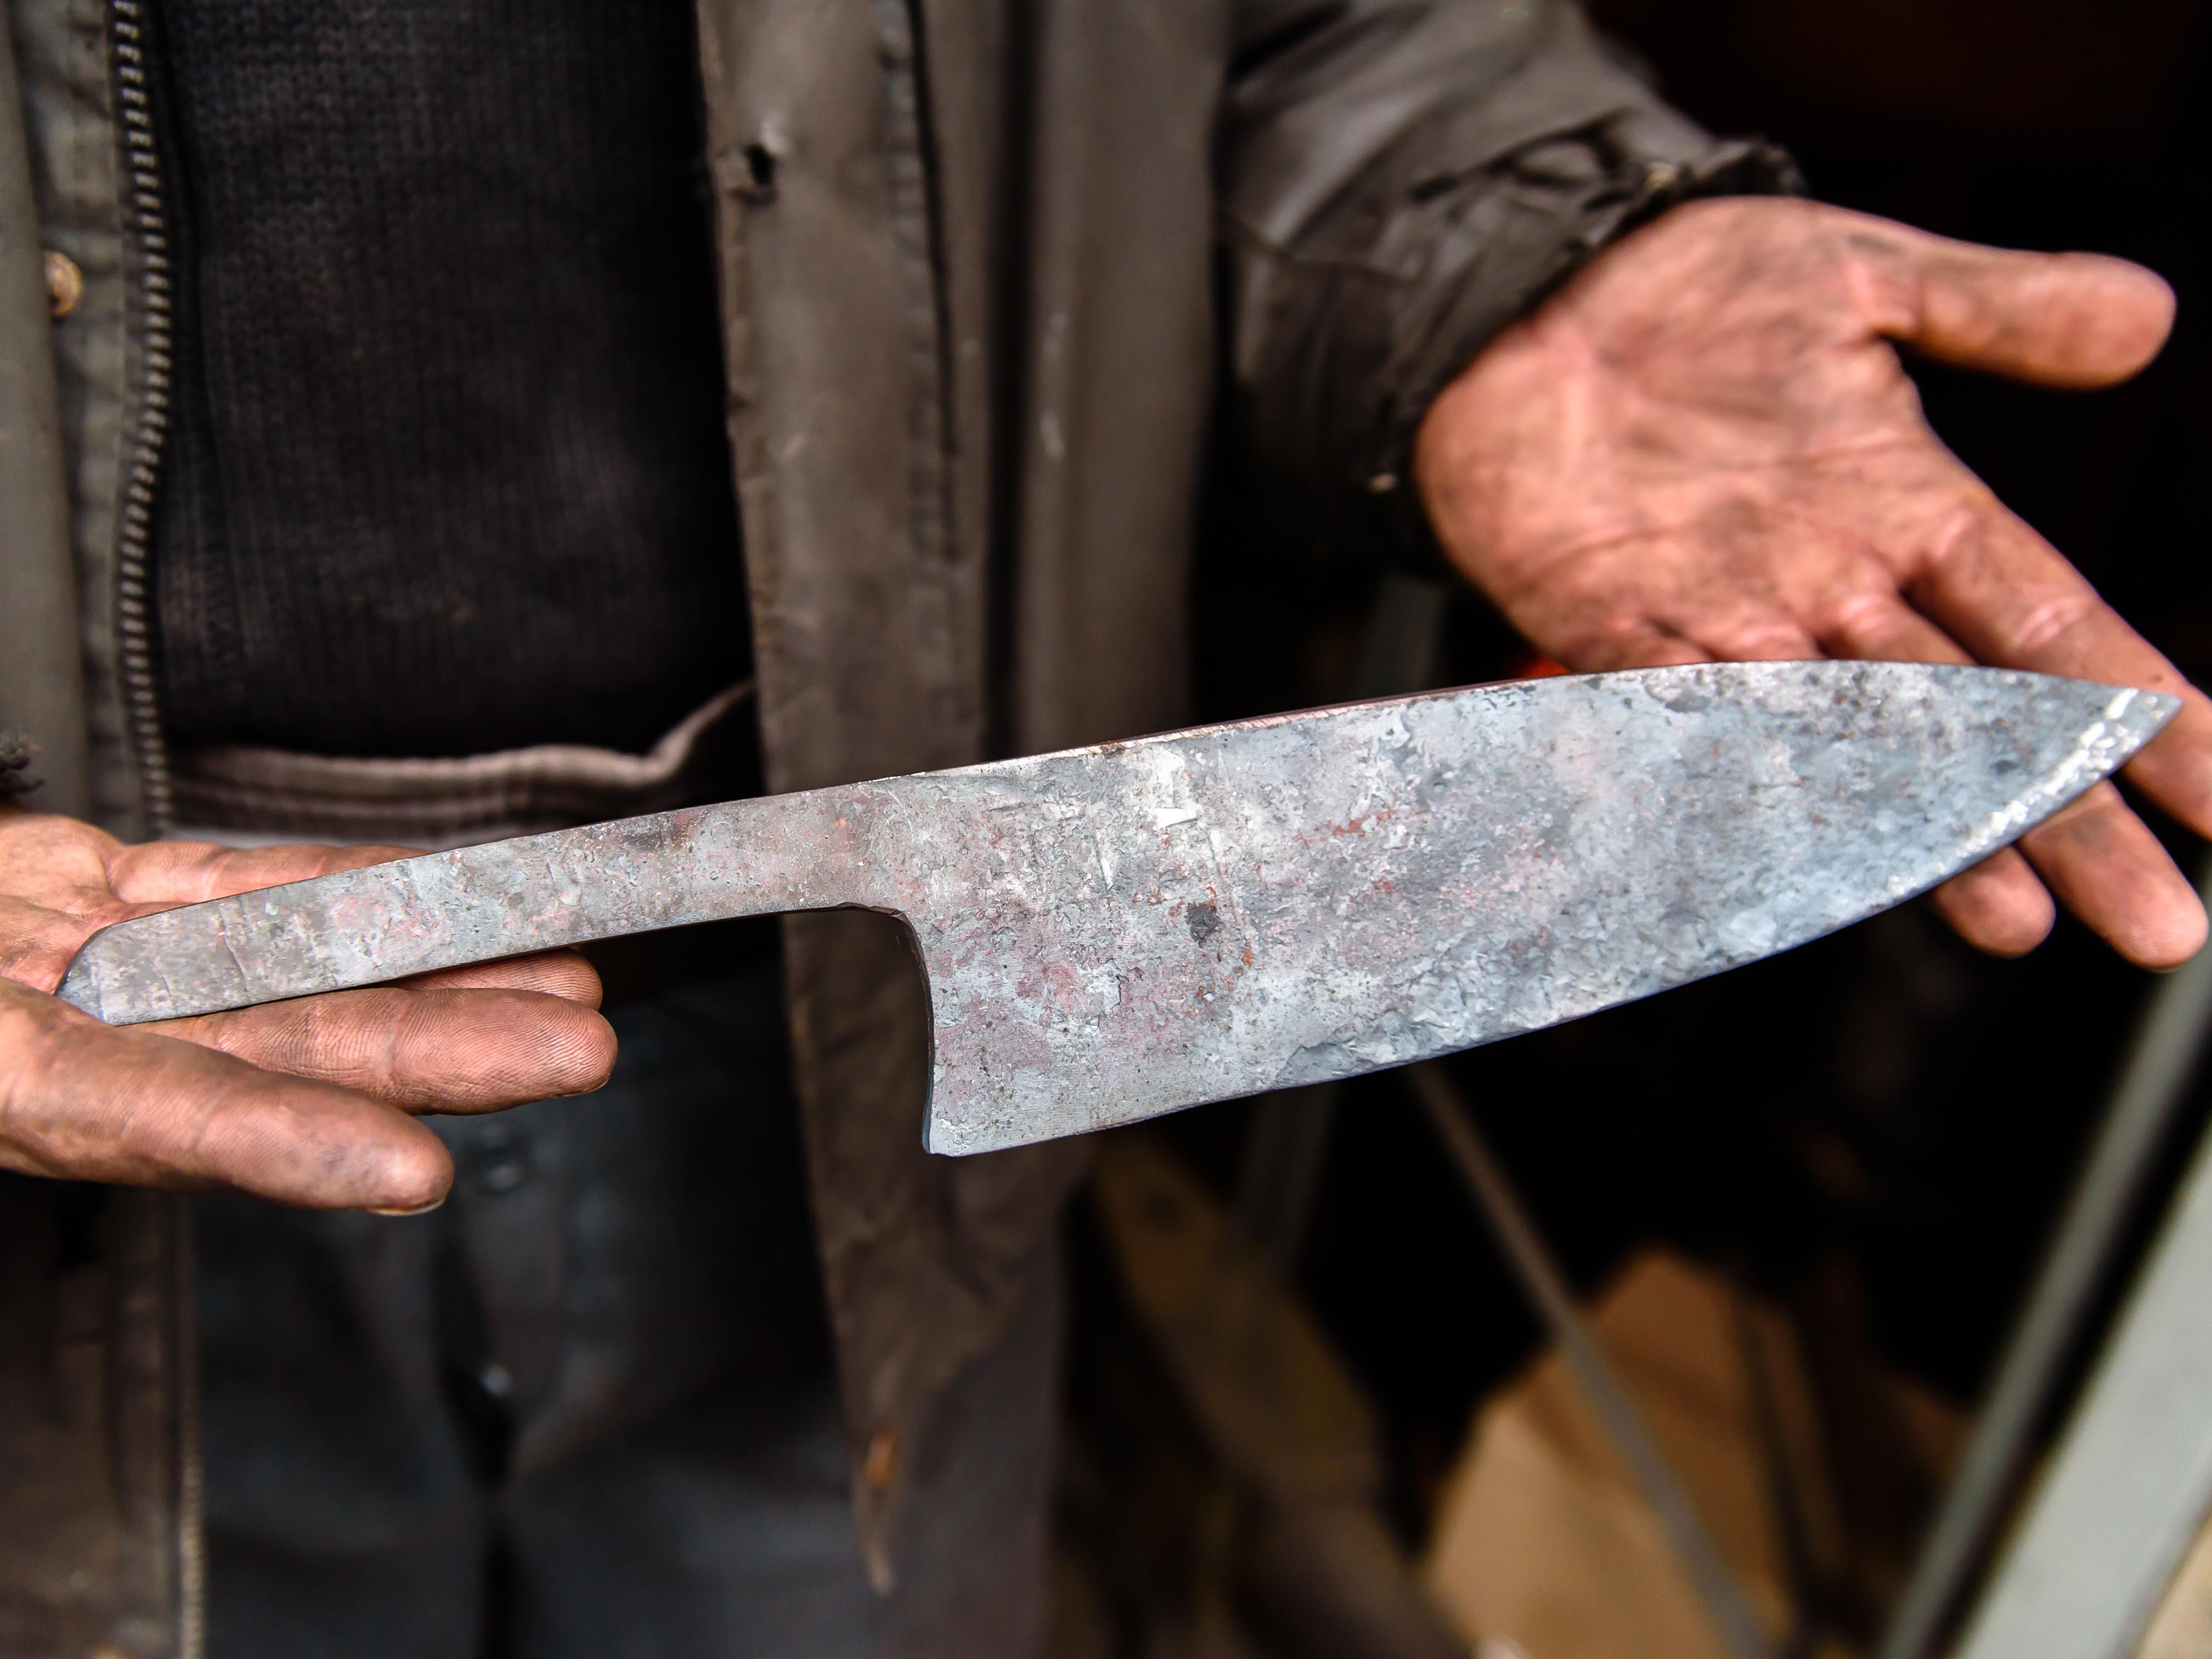 Forged knife in hand of a worker